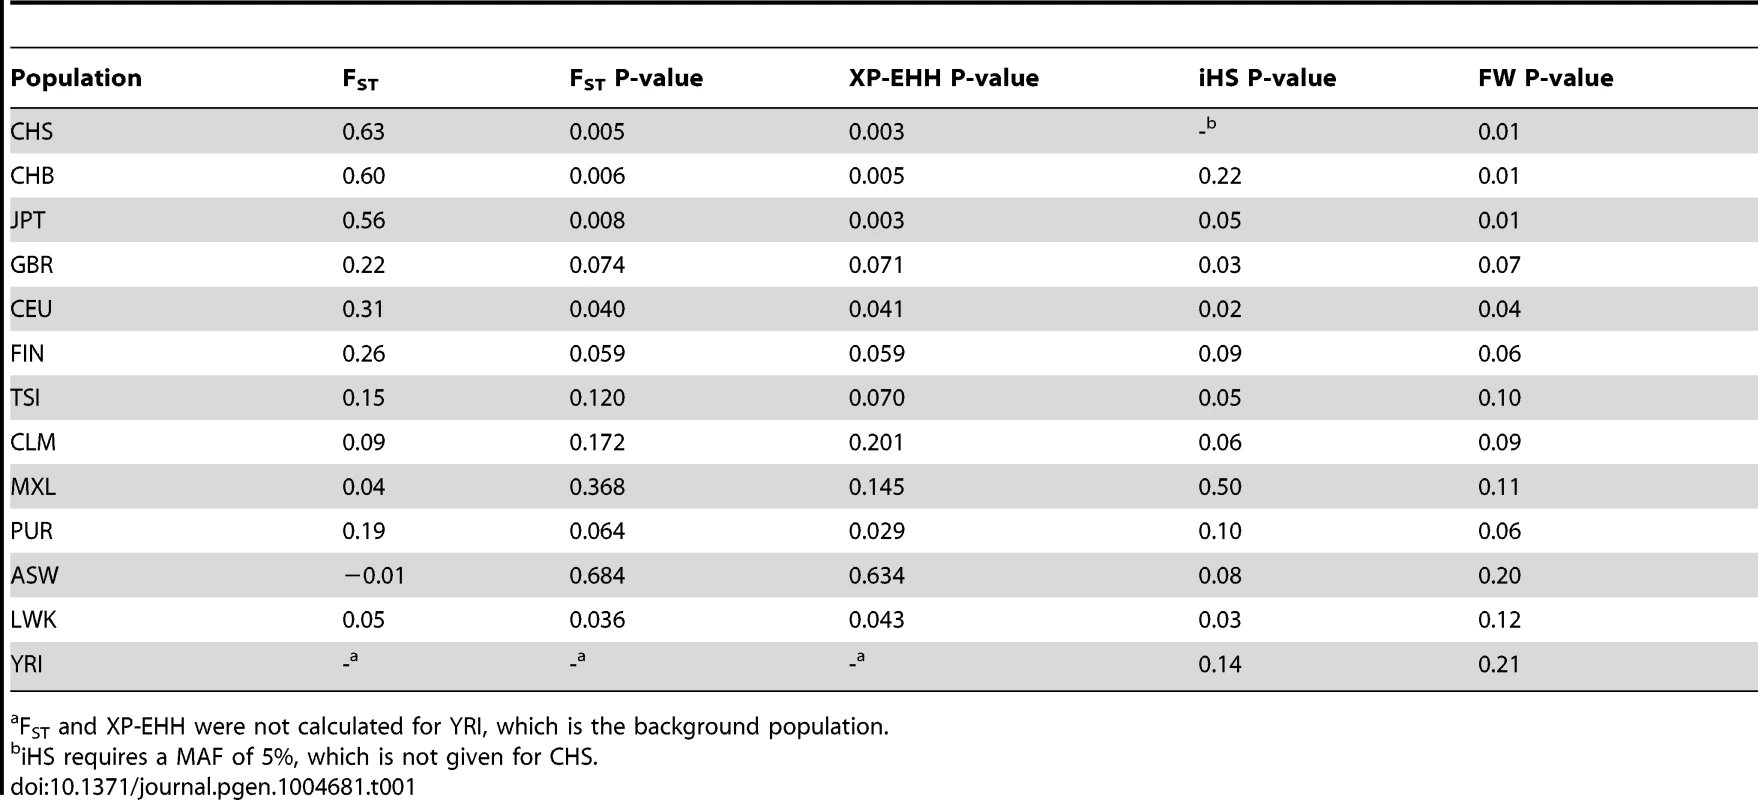 F<sub>ST</sub> values and for F<sub>ST</sub>, XP-EHH, iHS and Fay and Wu's H (FW) the empirical P-values are shown for rs368234815 in every population.